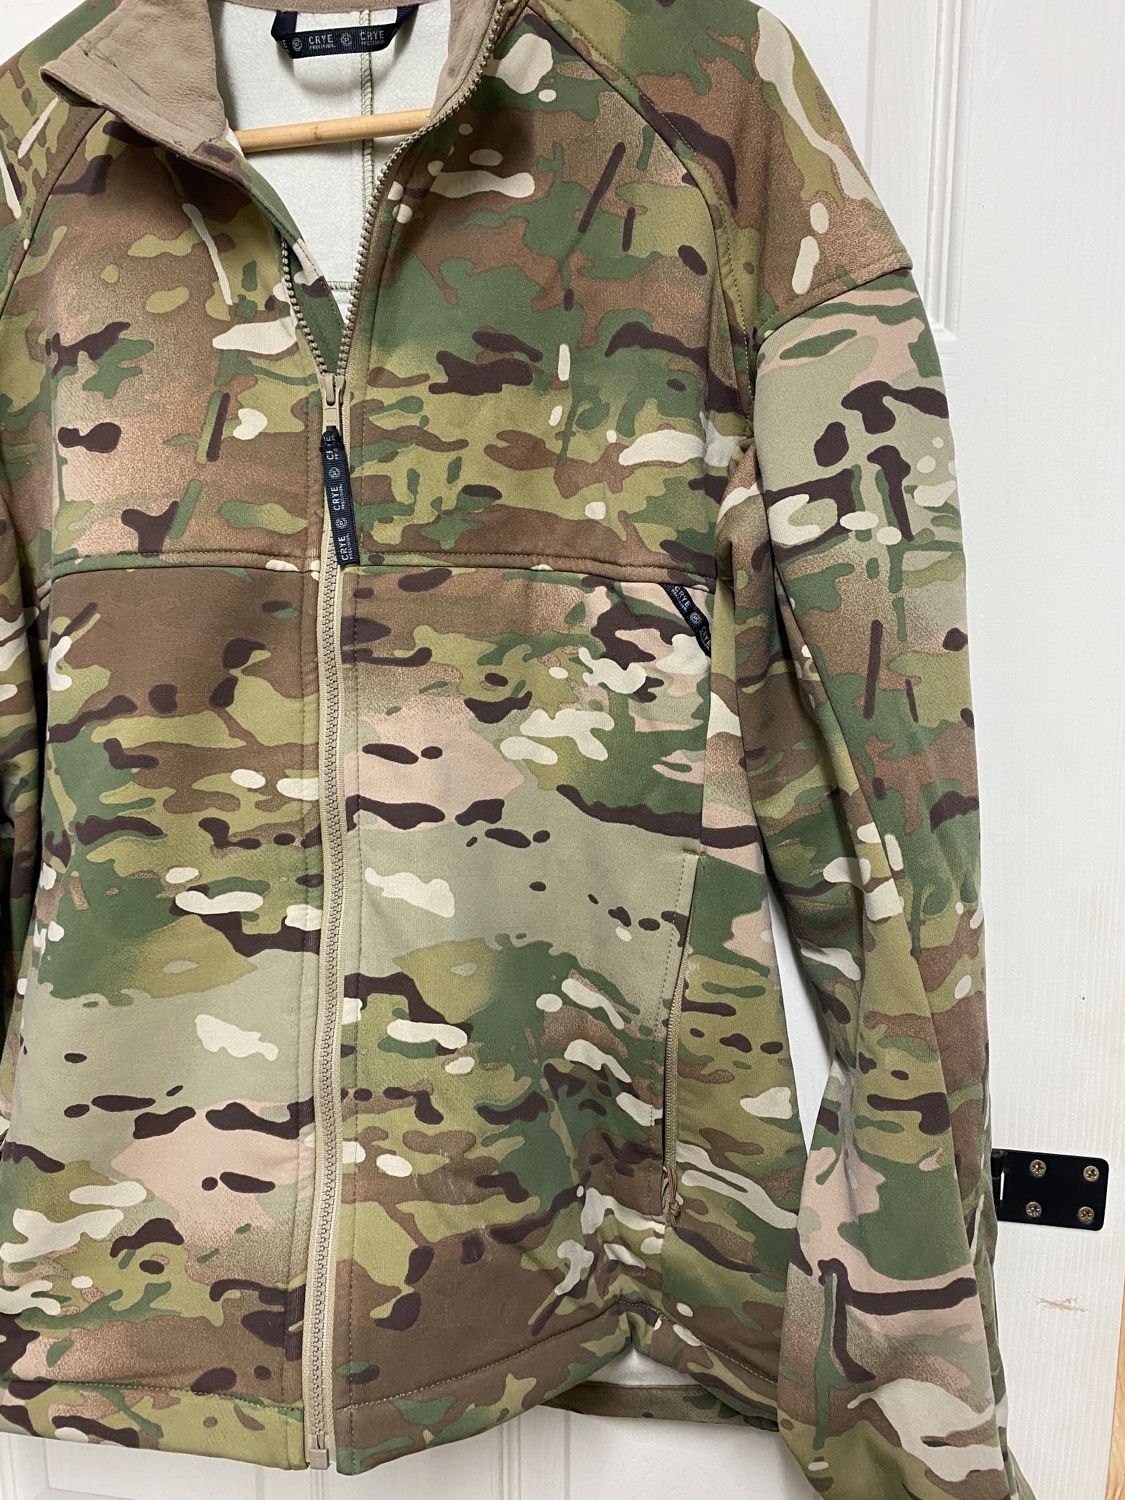 Crye Precision LWF jacket - Multicam - size large - Gear - Airsoft ...